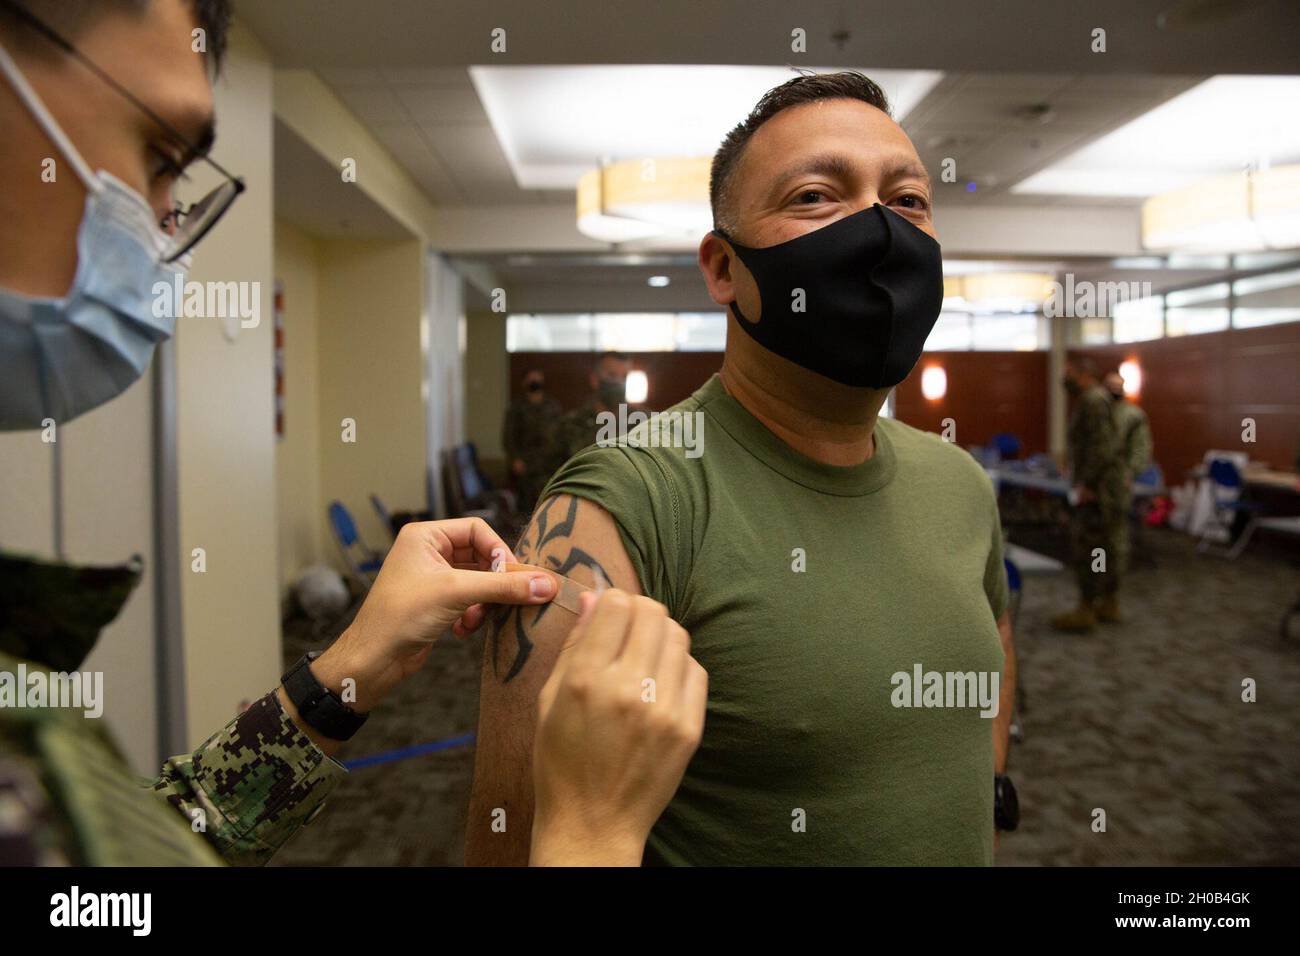 U.S. Marine Corps Master Gunnery Sgt. David Marinelarena, a field artillery chief with Headquarters Battery, 11th Marine Regiment, 1st Marine Division, receives the COVID-19 vaccination on Marine Corps Base Camp Pendleton, California, Jan. 15, 2021. The vaccine will help protect service members against COVID-19 and maintain medical readiness throughout 1st Marine Division. Stock Photo